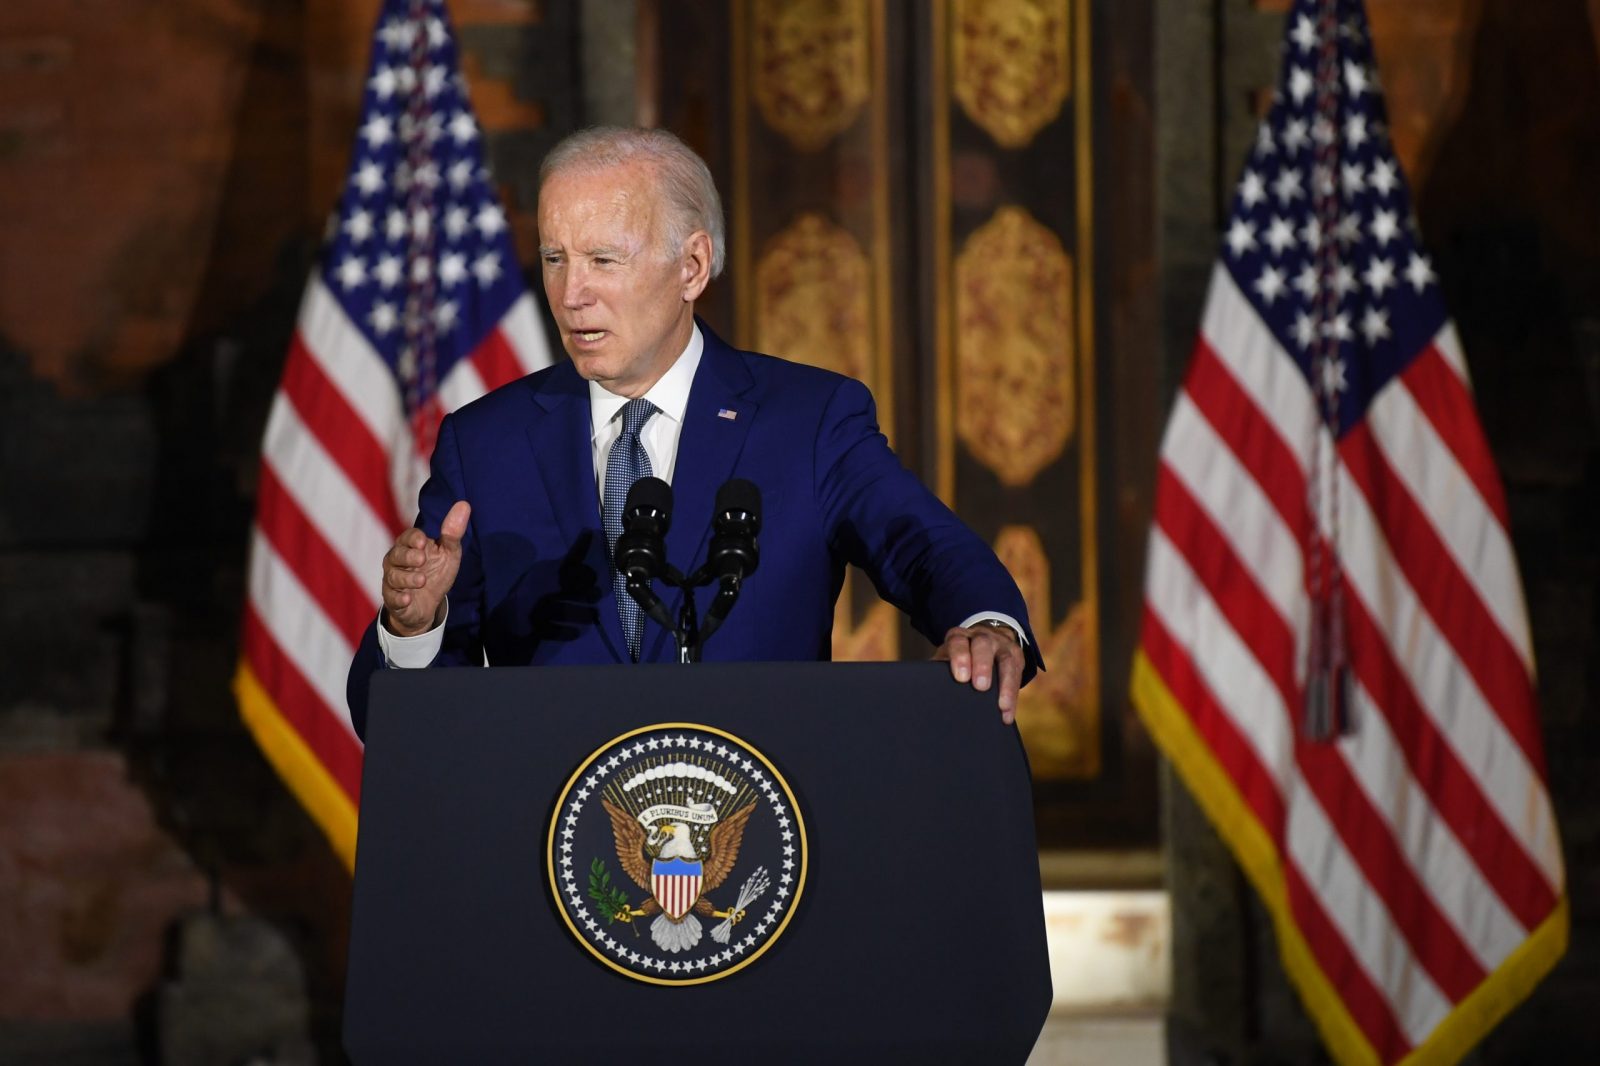 epa10305510 U.S. President Joe Biden speaks during a press conference ahead of the G20 Summit in Nusa Dua, Bali, Indonesia, 14 November 2022. The 17th Group of Twenty (G20) Heads of State and Government Summit will be held in Bali from 15 to 16 November 2022.  EPA/AKBAR NUGROHO GUMAY / POOL